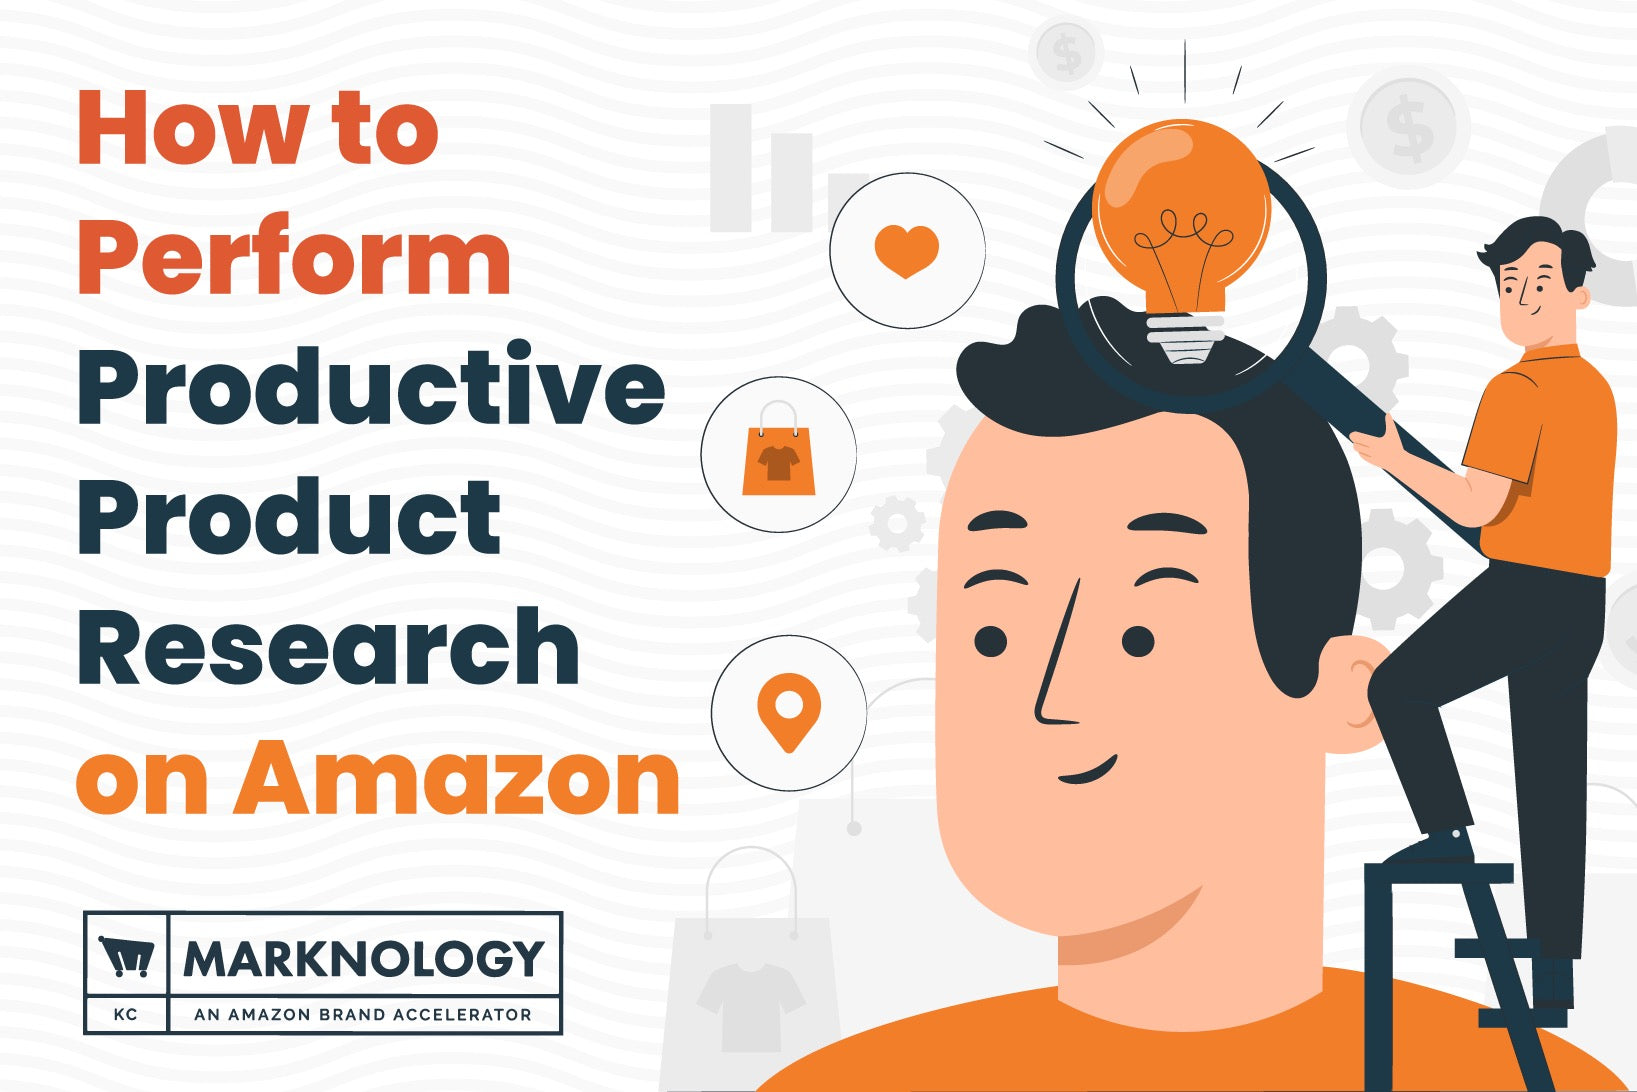 How to Perform Productive Product Research on Amazon